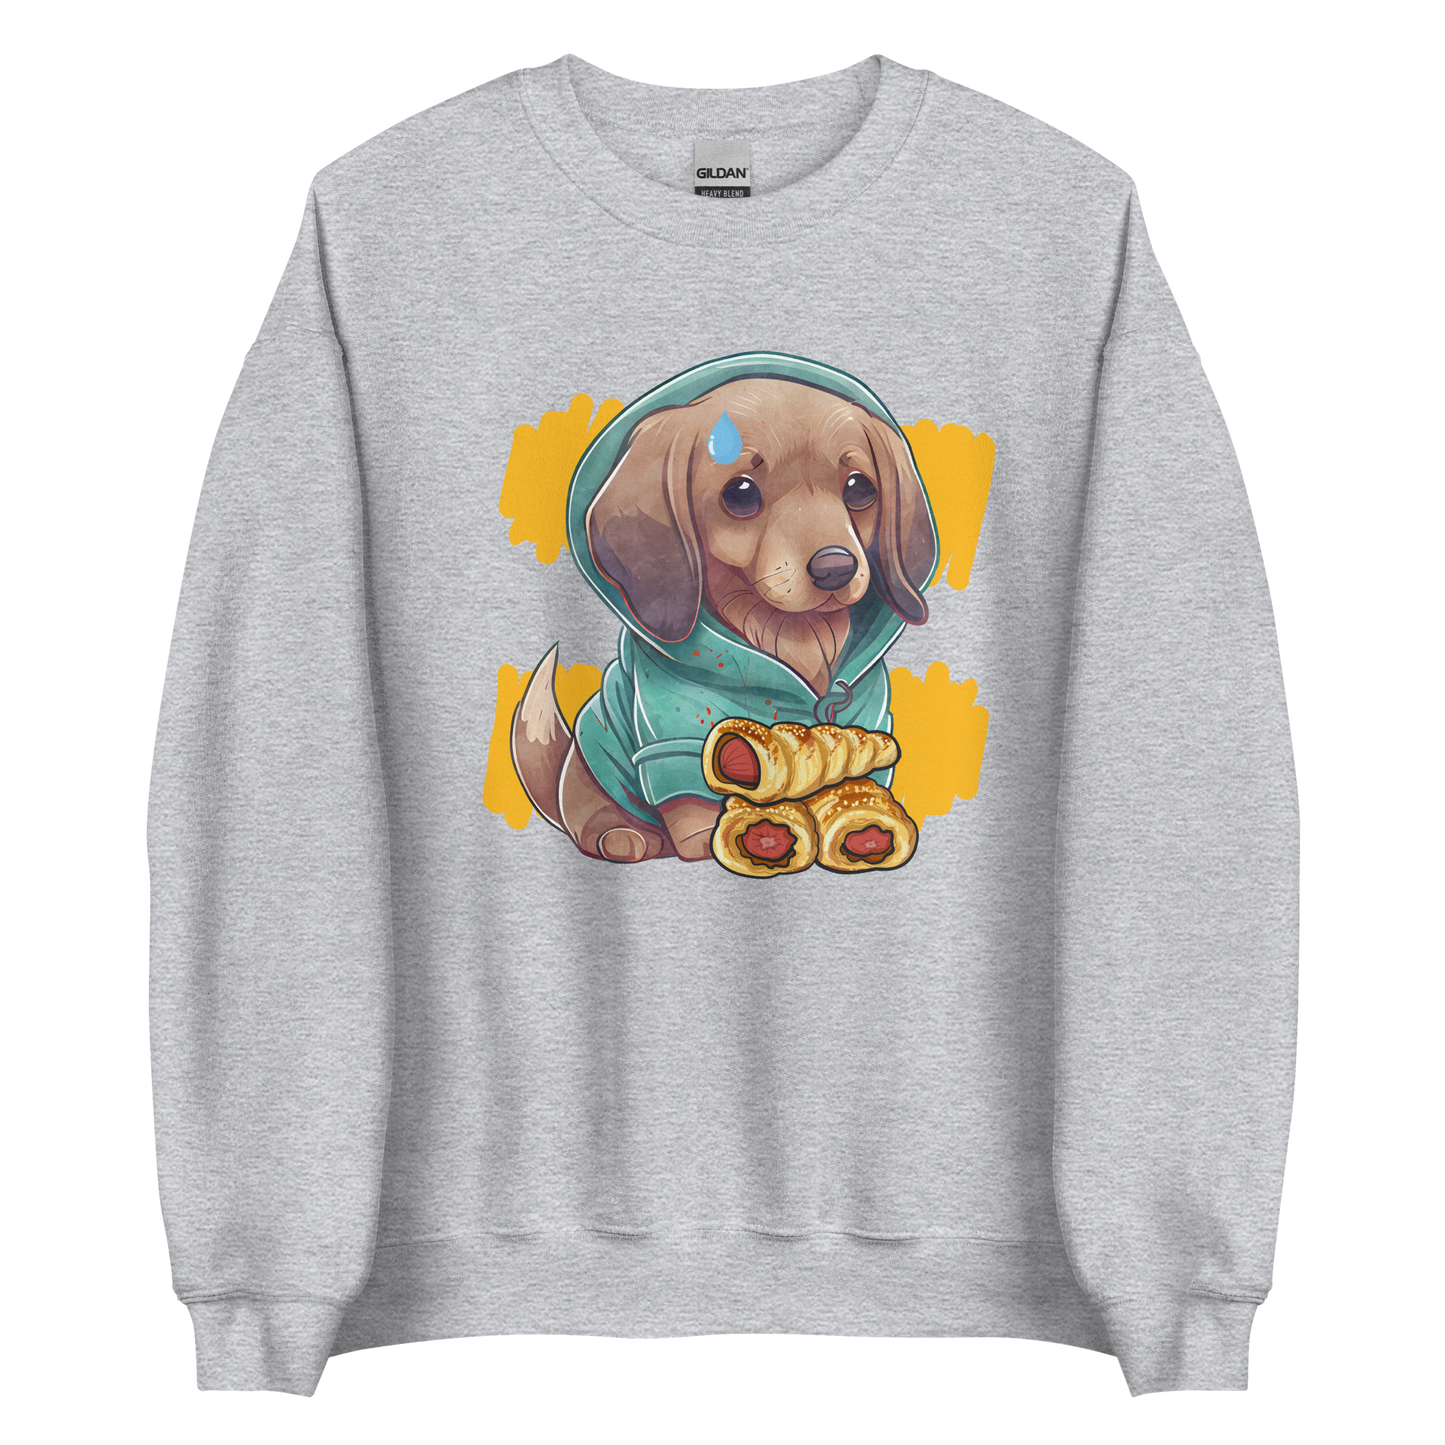 Sport Grey  Sausage Dog Sweatshirt featuring an adorable Sausage Roll Dachshund graphic on the chest - Funny Graphic Sausage Dog Sweatshirts - Boozy Fox